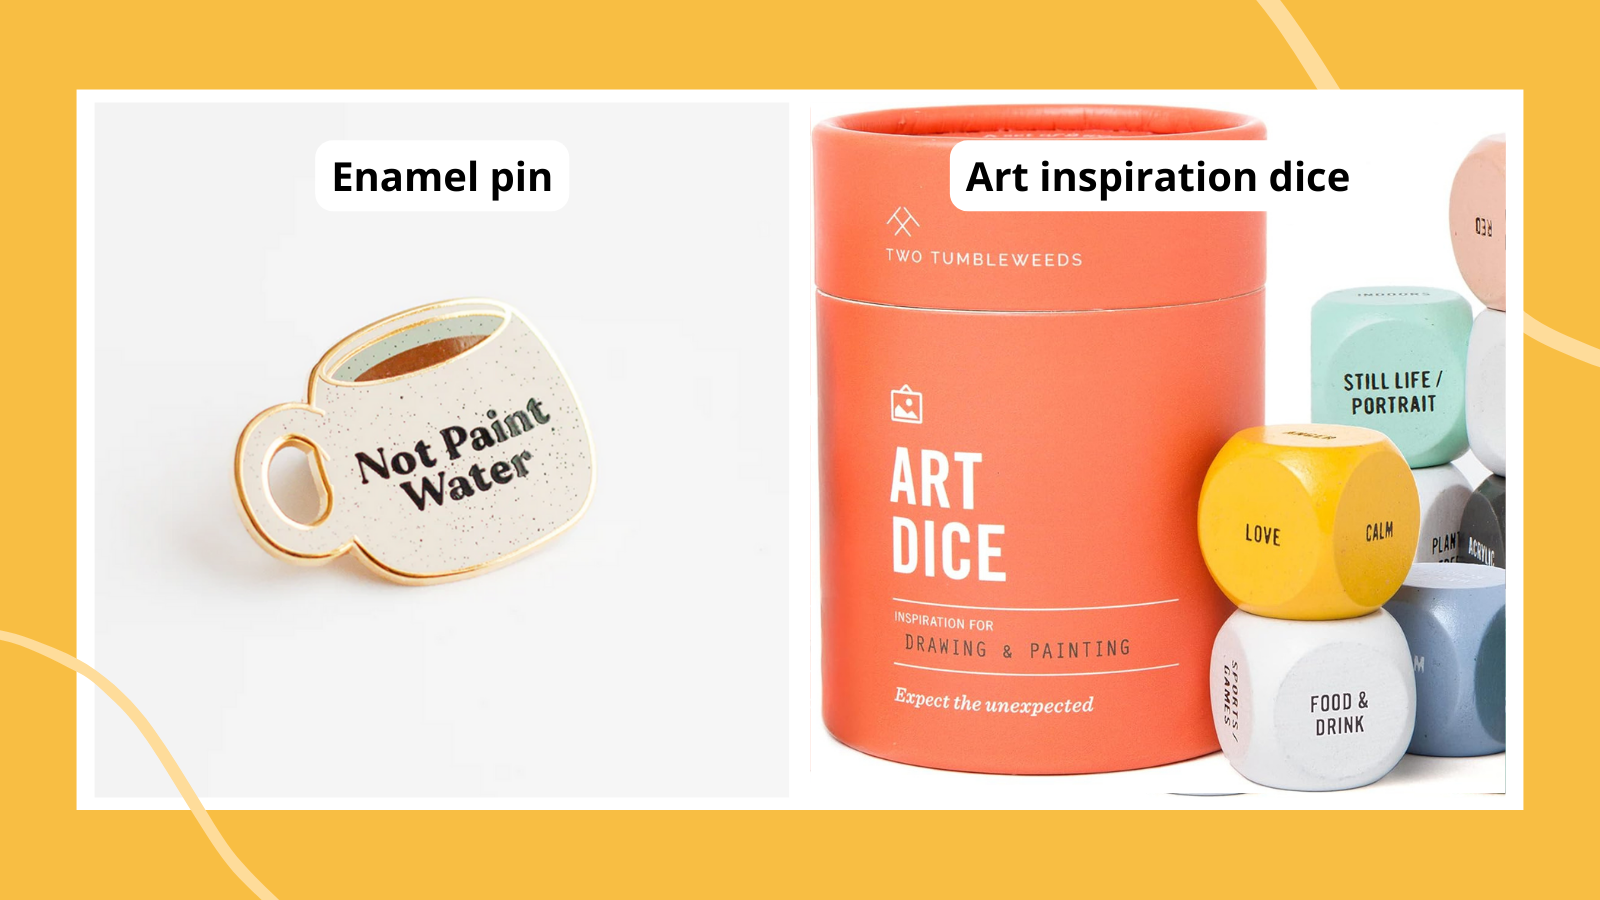 Examples of gifts for art teachers including an pin and music dice.